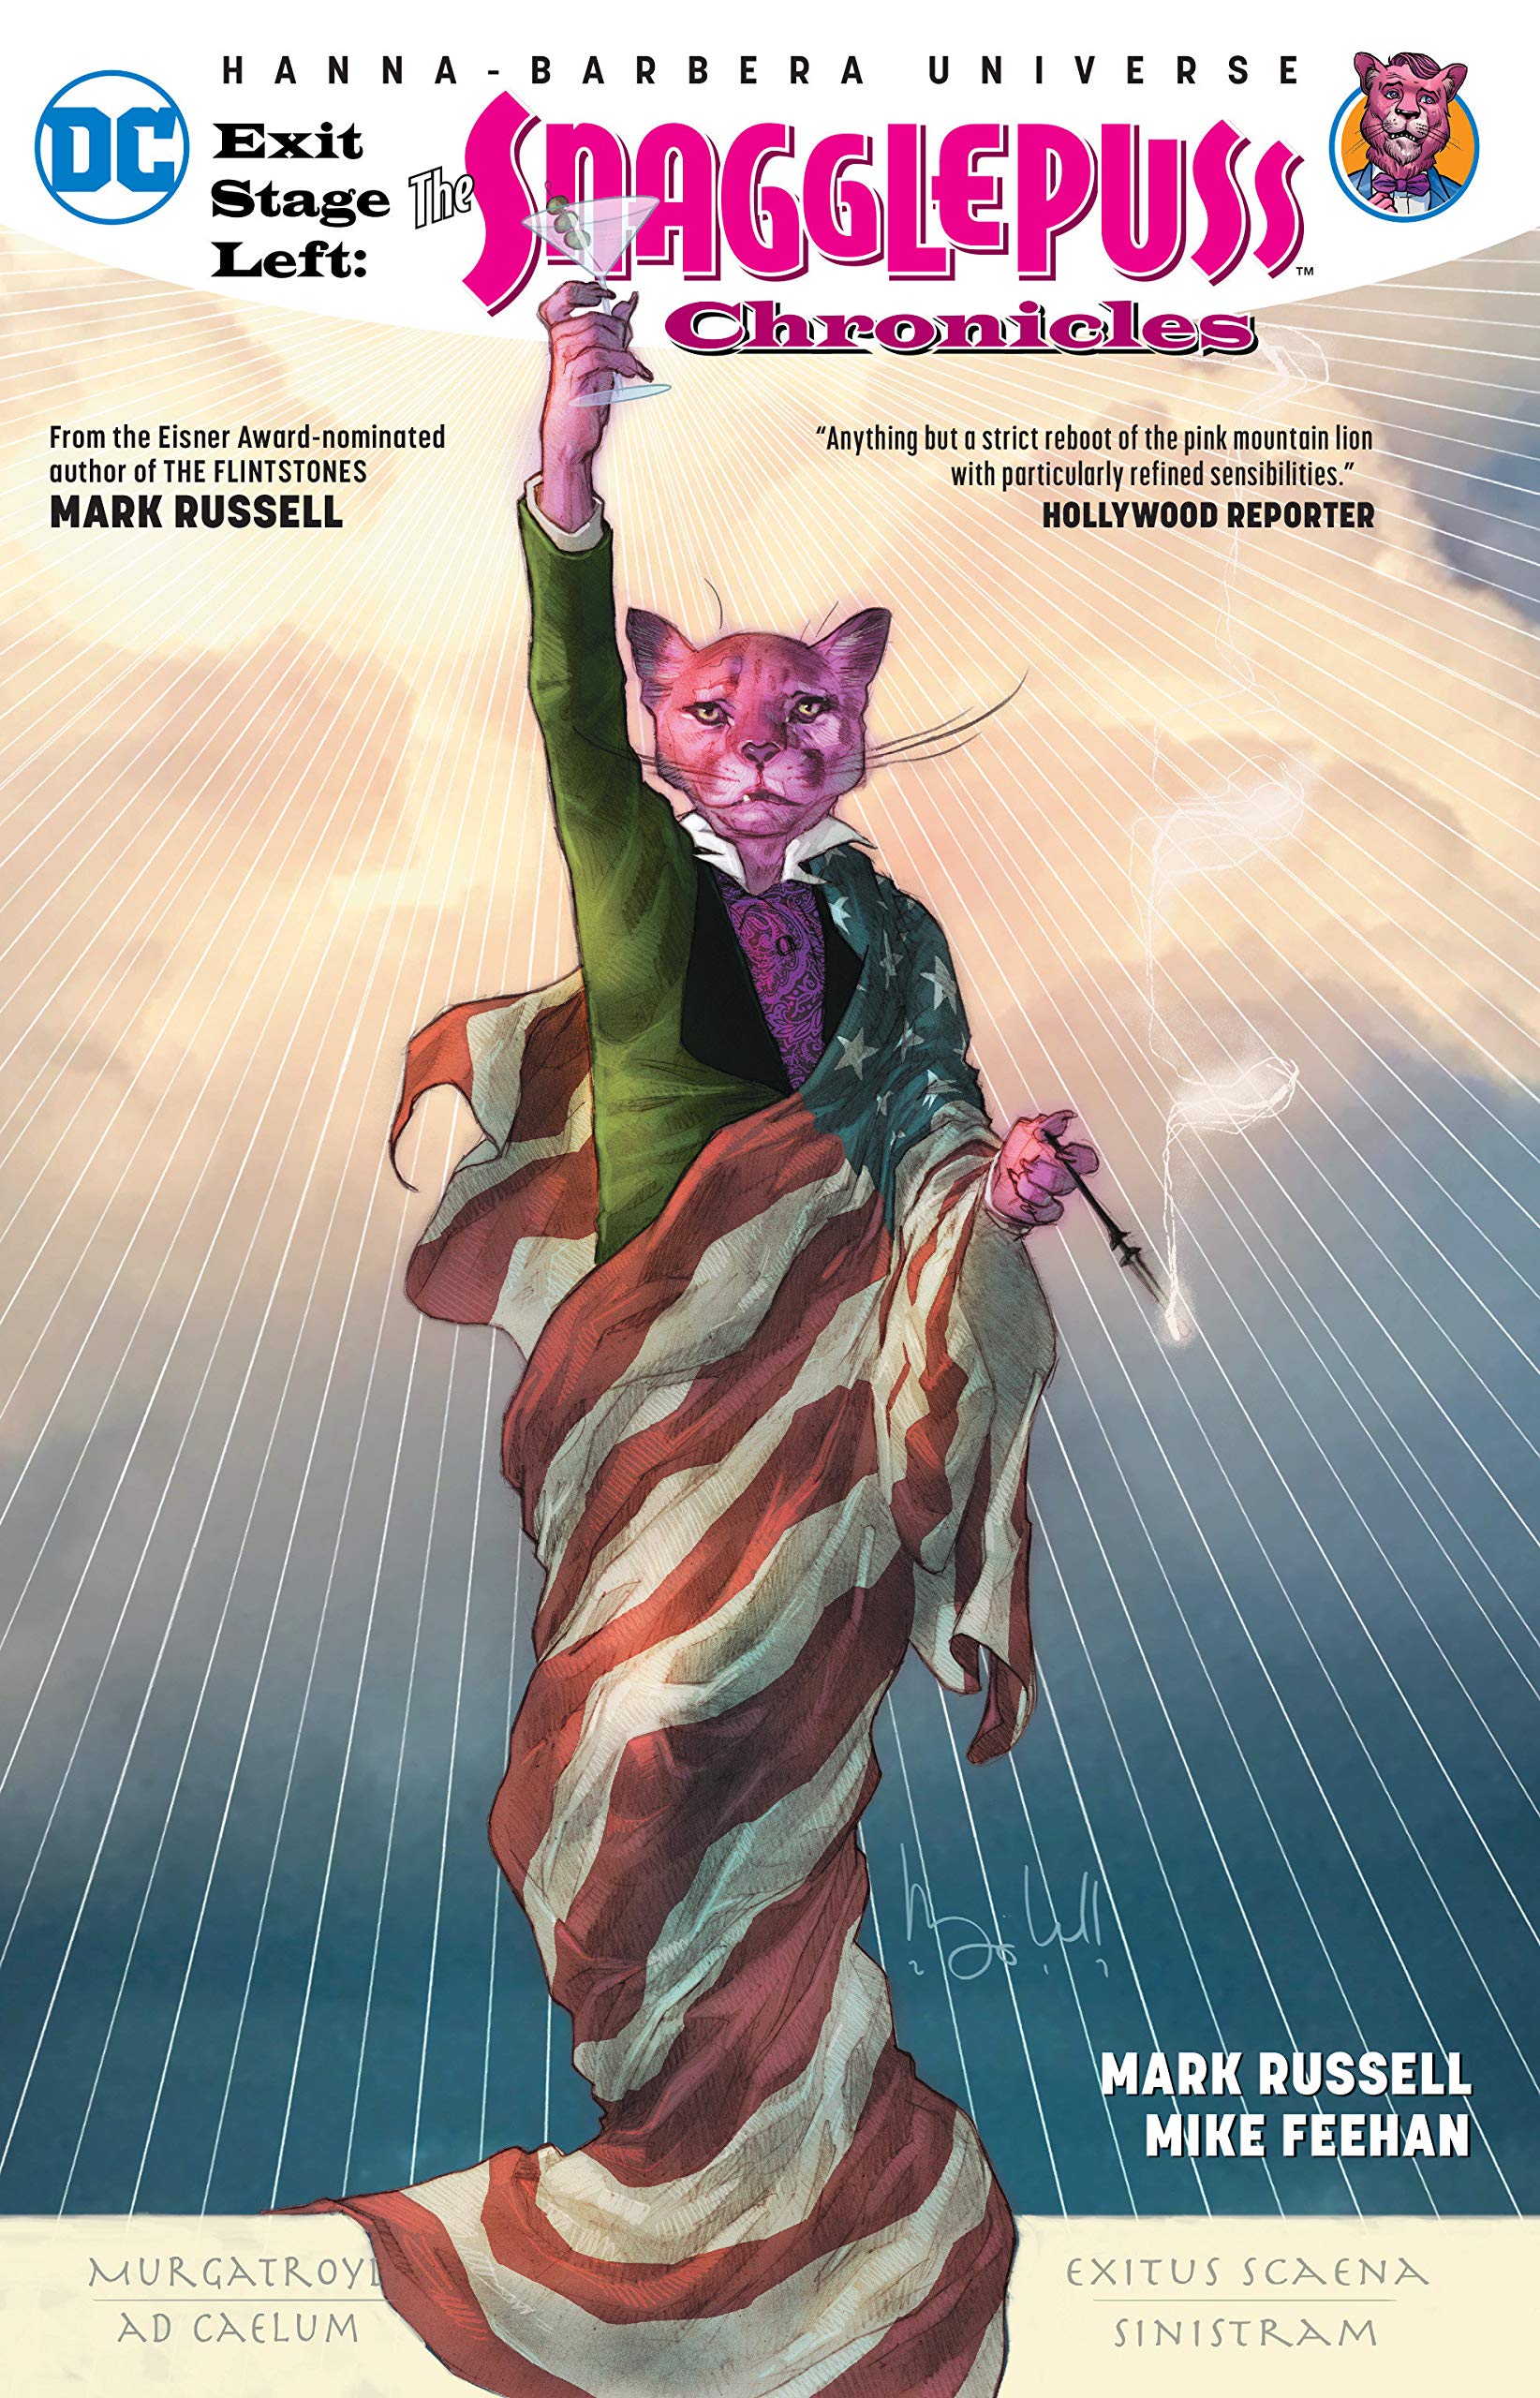 Exit Stage Left : The Snagglepuss Chronicles - The Comic Warehouse